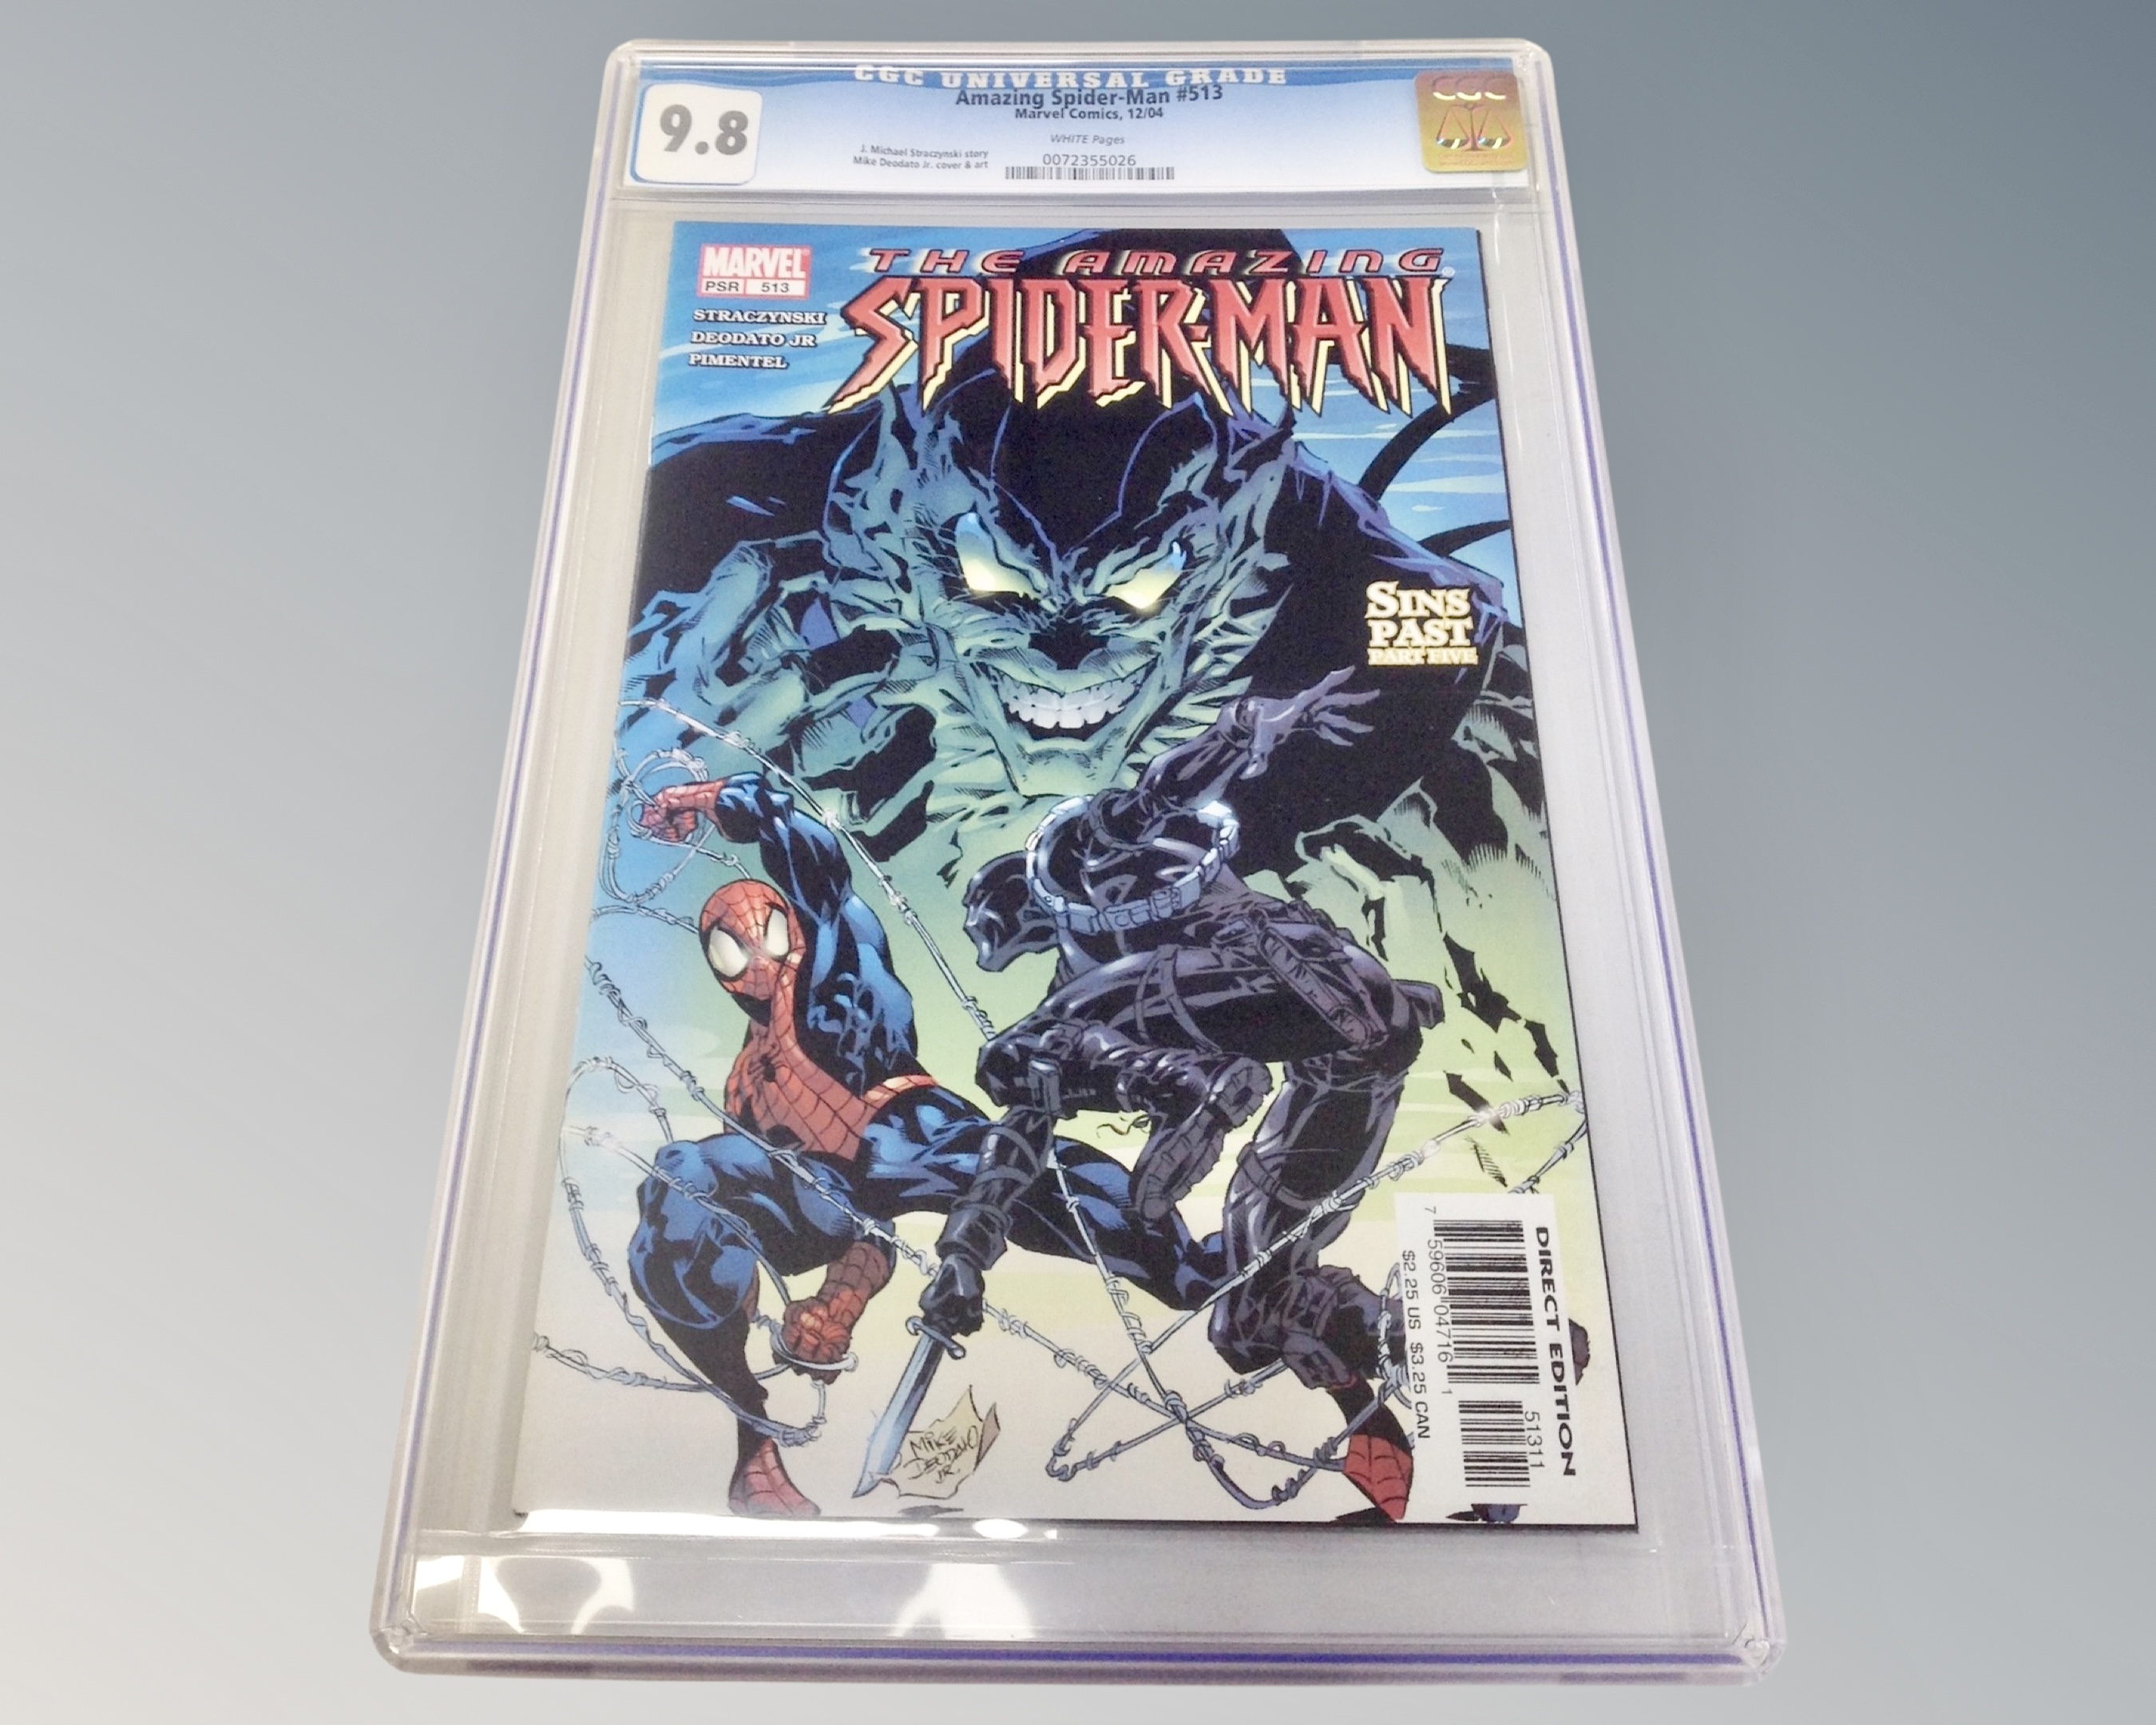 Marvel Comics : The Amazing Spider-Man issue 513 CGC Universal Grade, slabbed and graded 9.